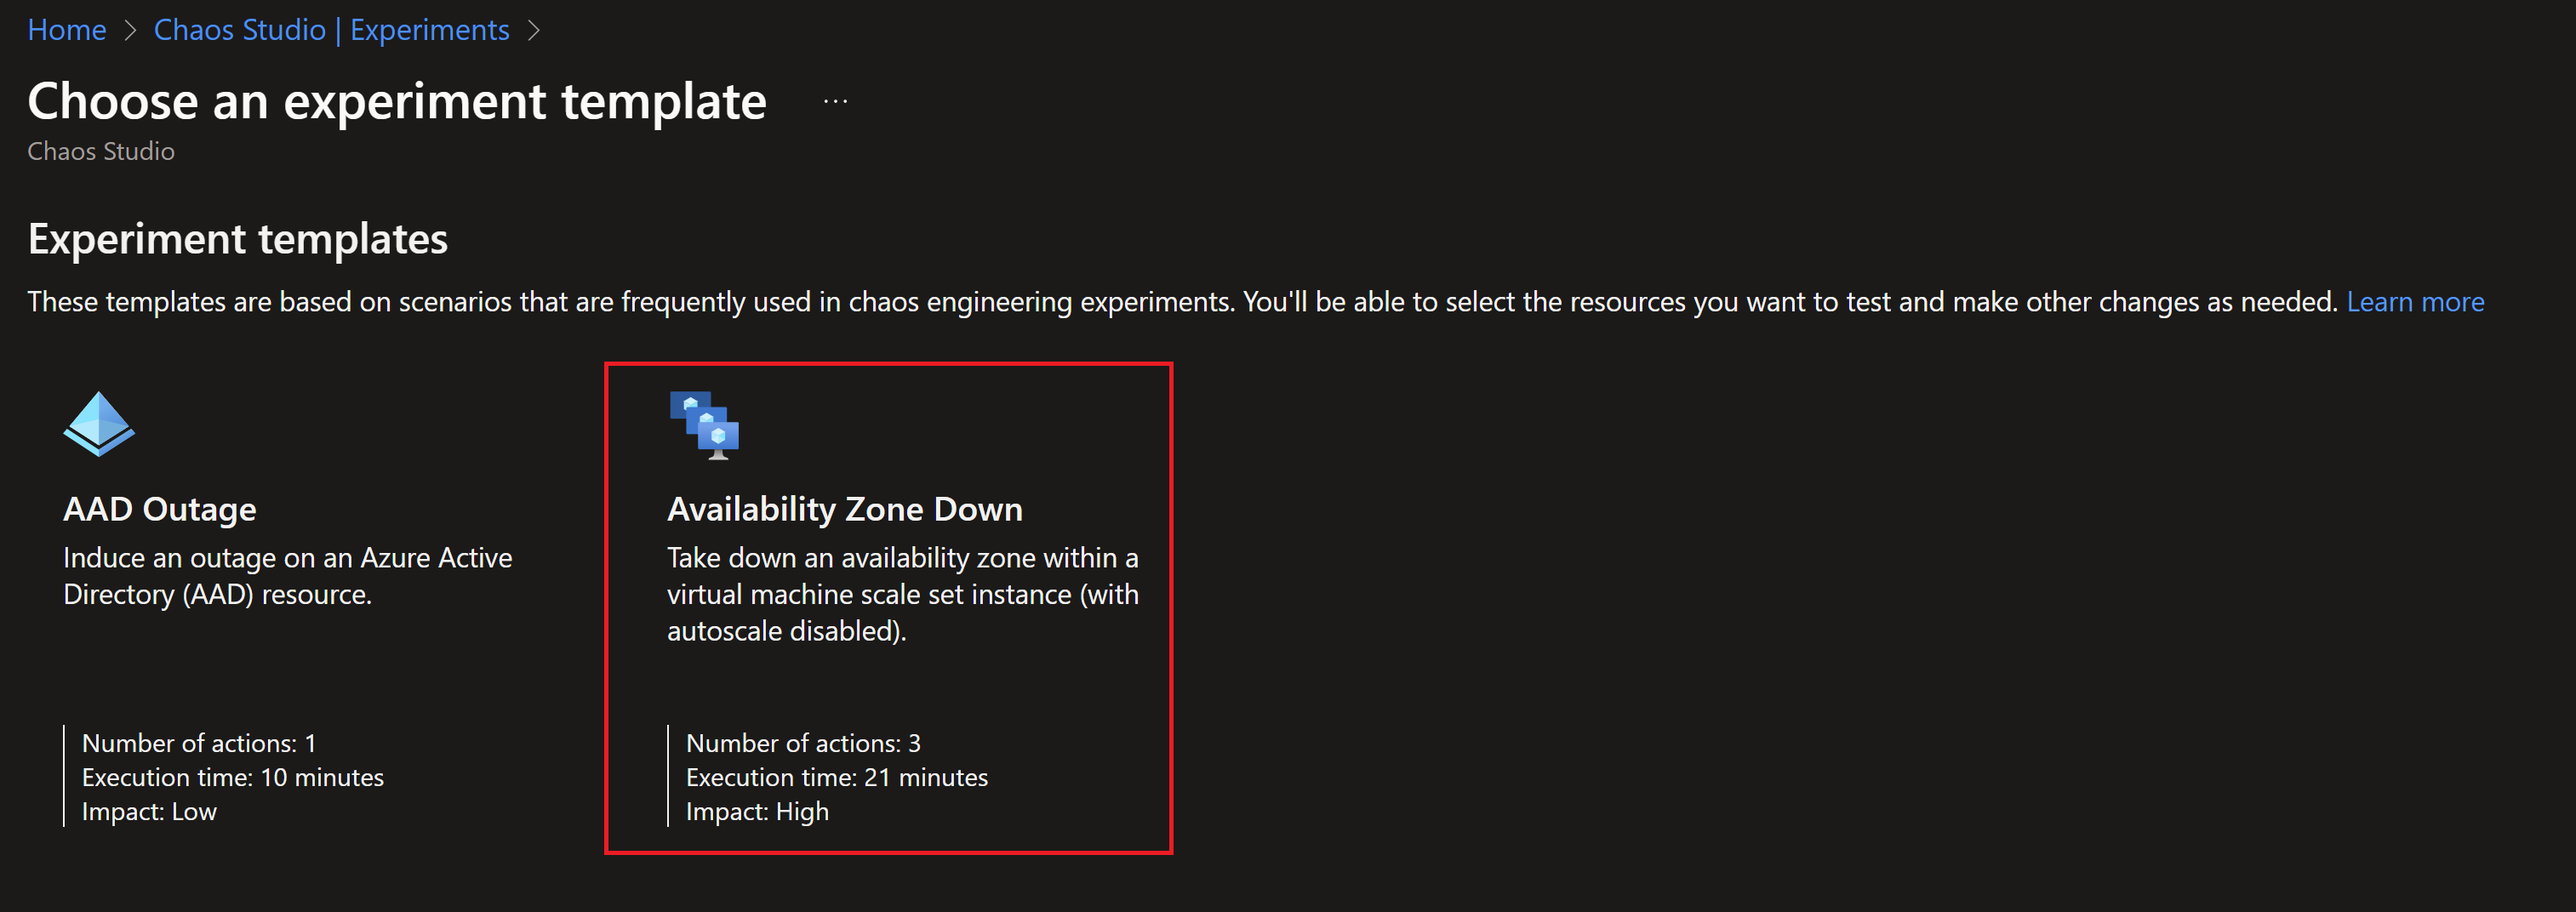 Screenshot showing creating a new availability zone down experiment from template